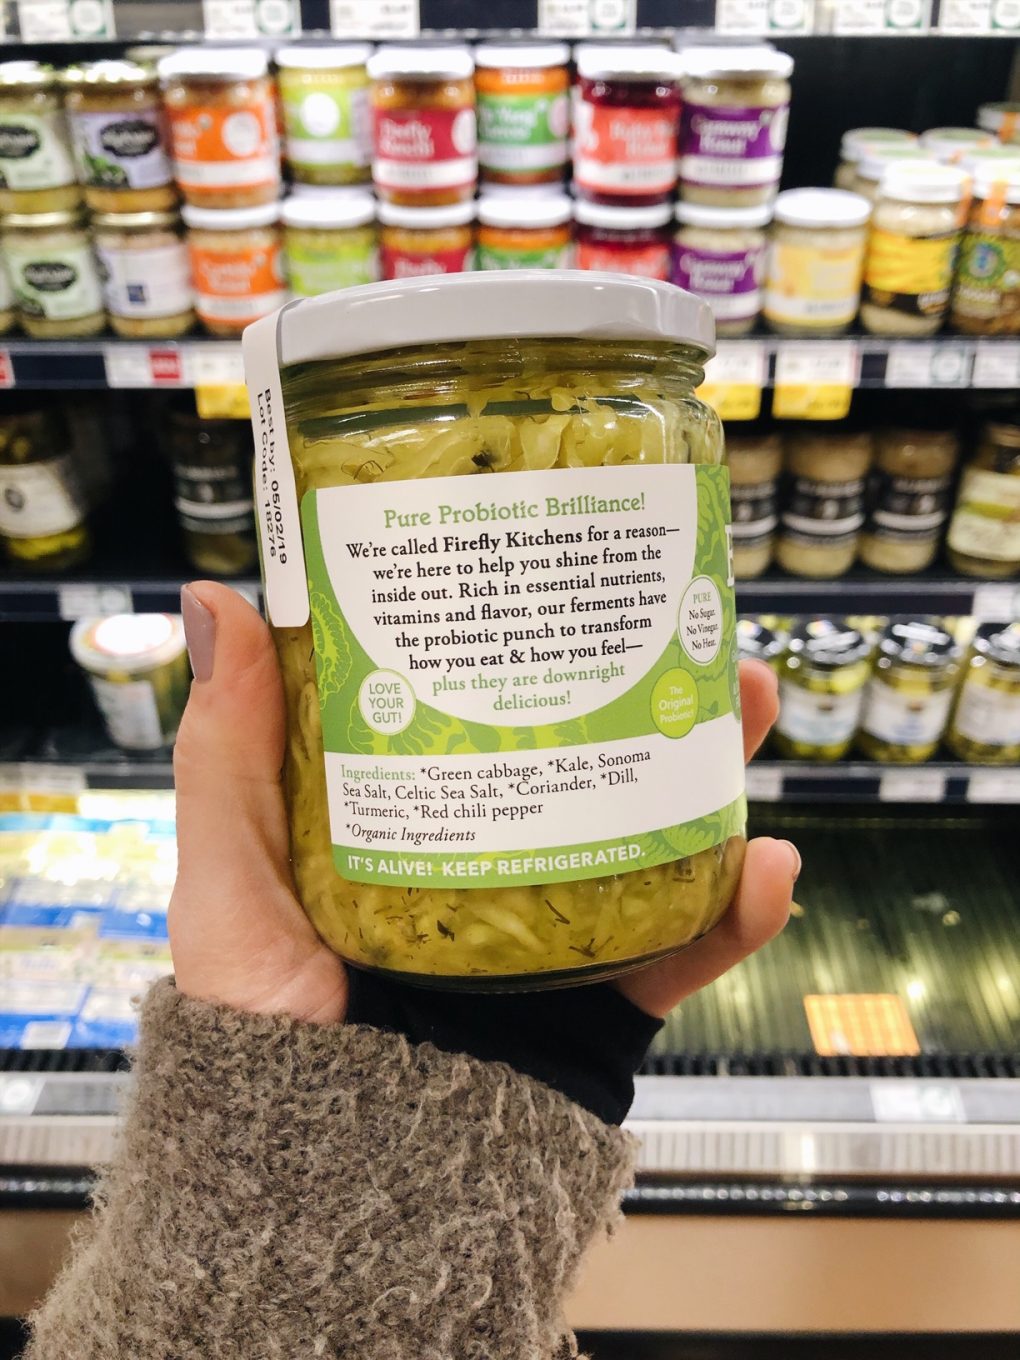 Holding a jar of emerald city sauerkraut at the grocery store with ingredients showing